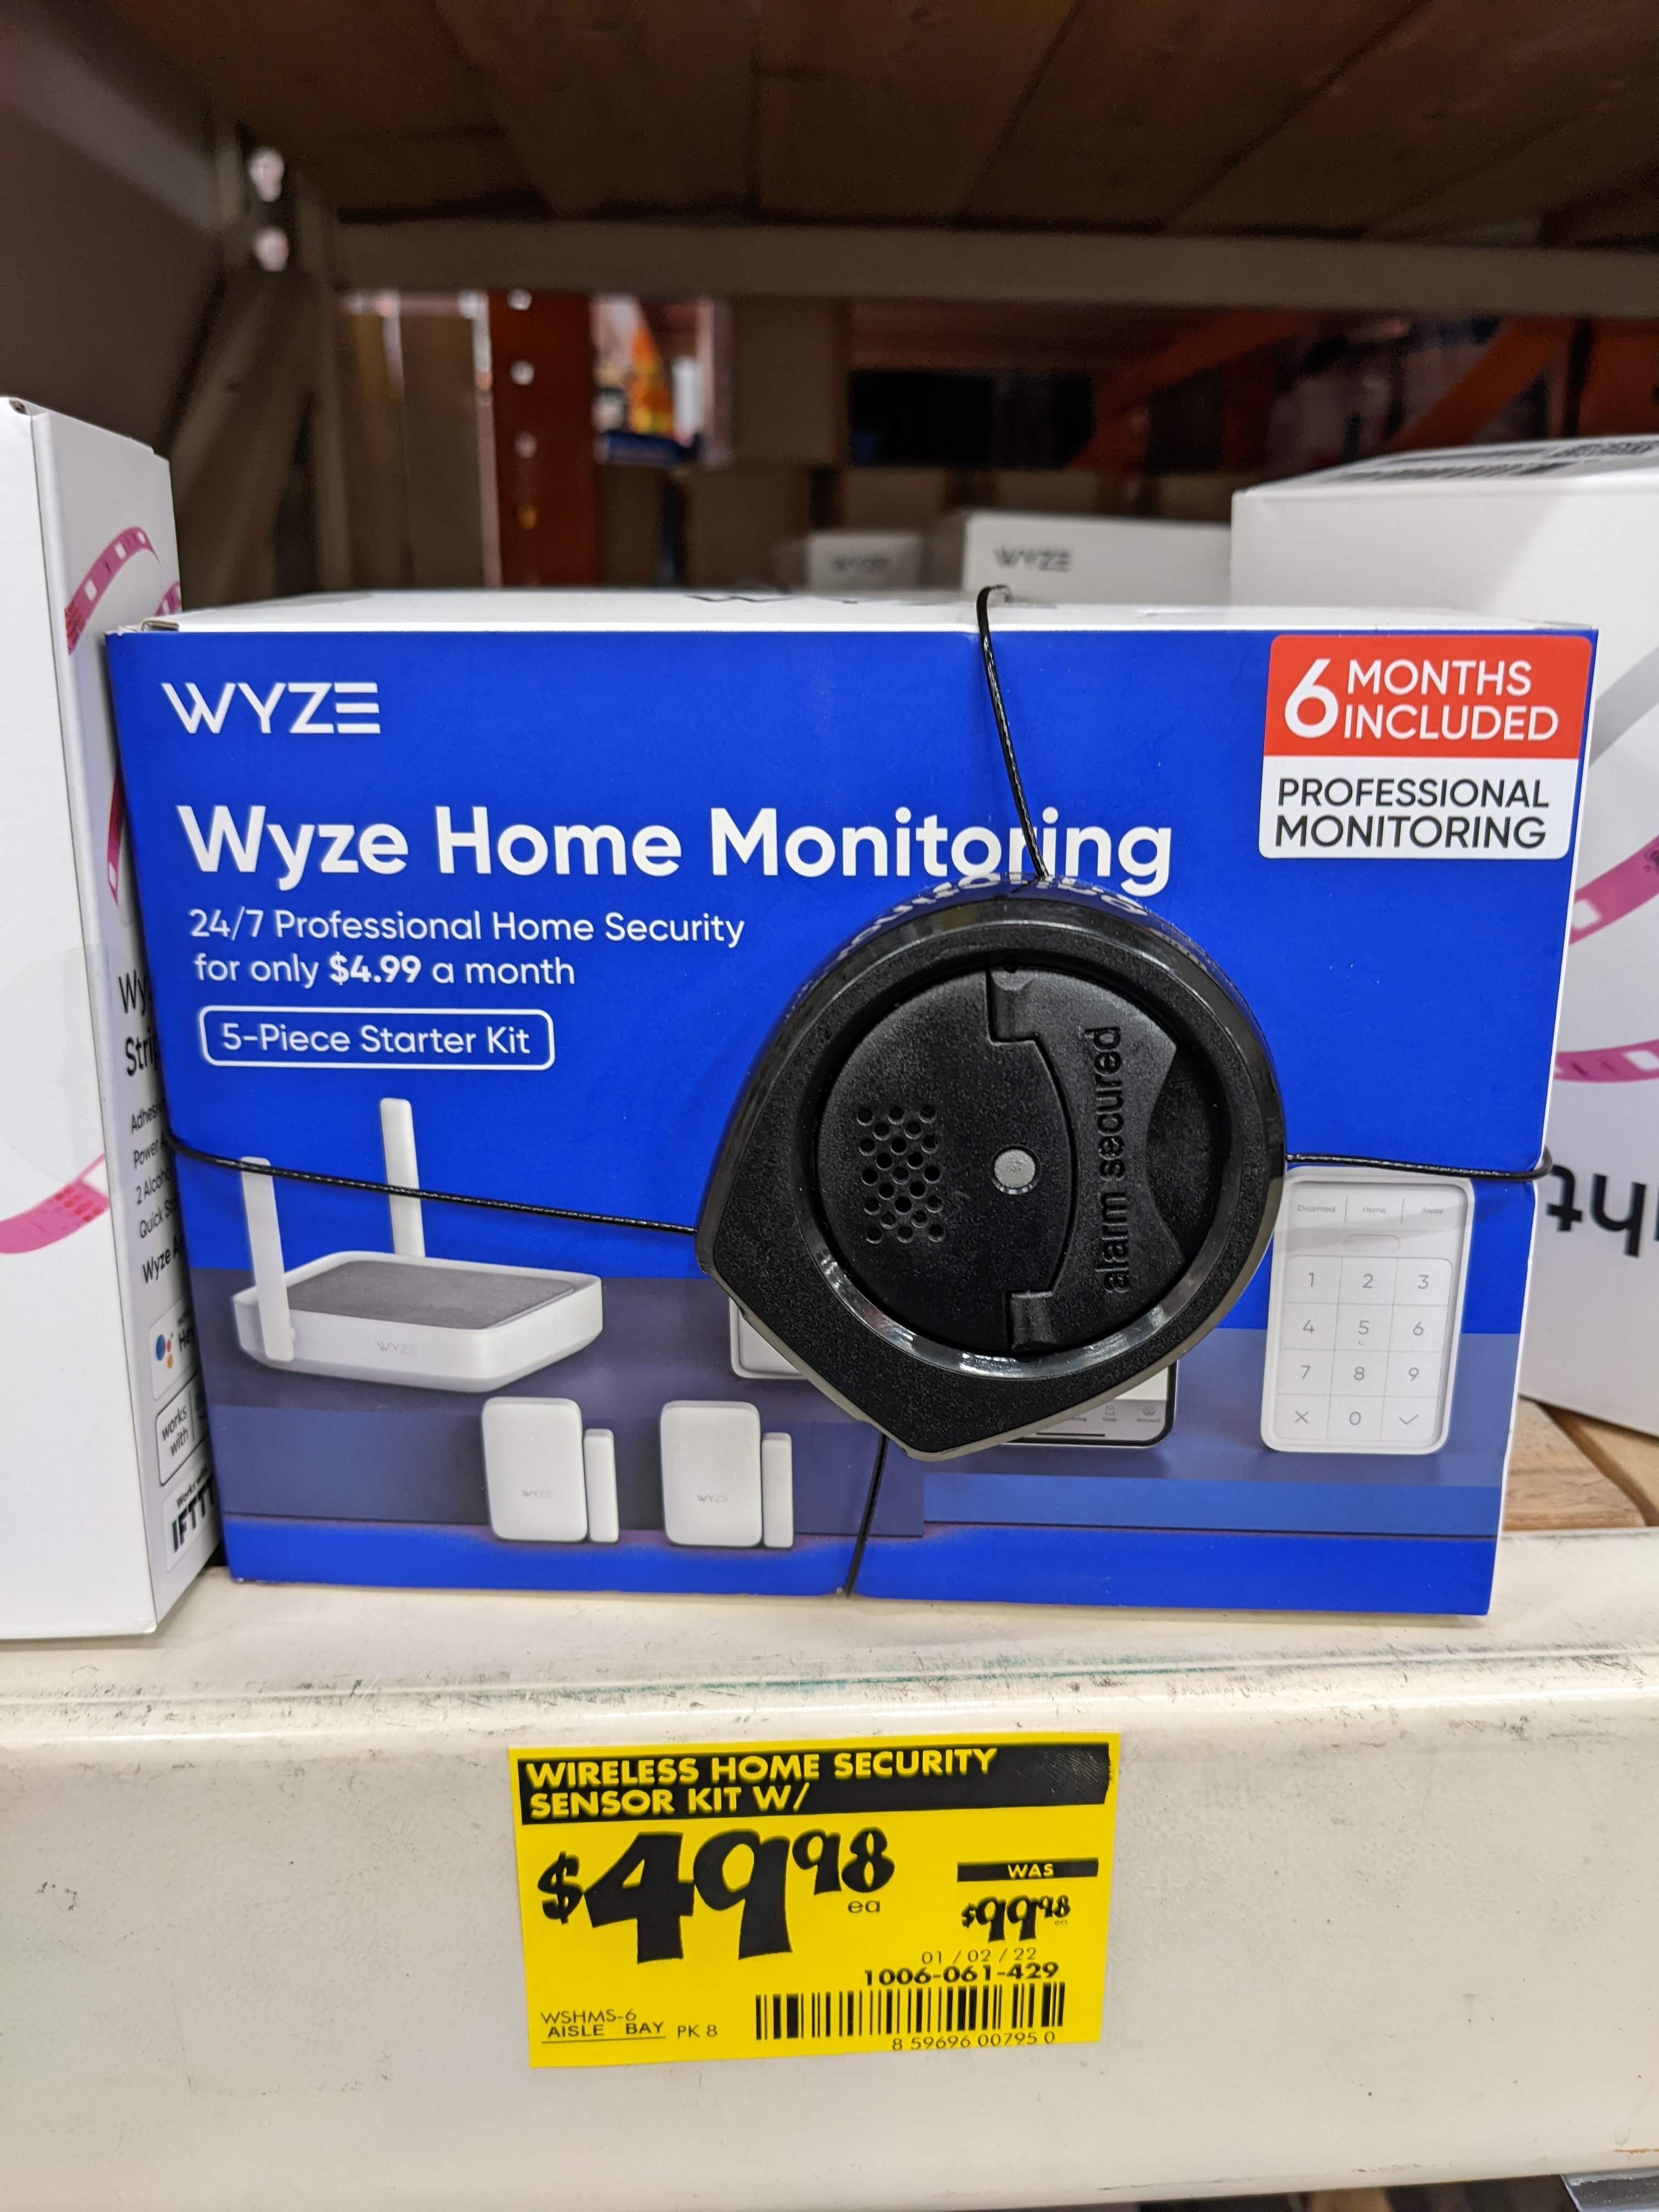 YMMV--WYZE Wireless Home Security Sensor Kit with Hub, Keypad, Motion, Entry Sensors, and 6 Mo. of 24/7 Professional Monitoring-WSHMS-6M - $49.98